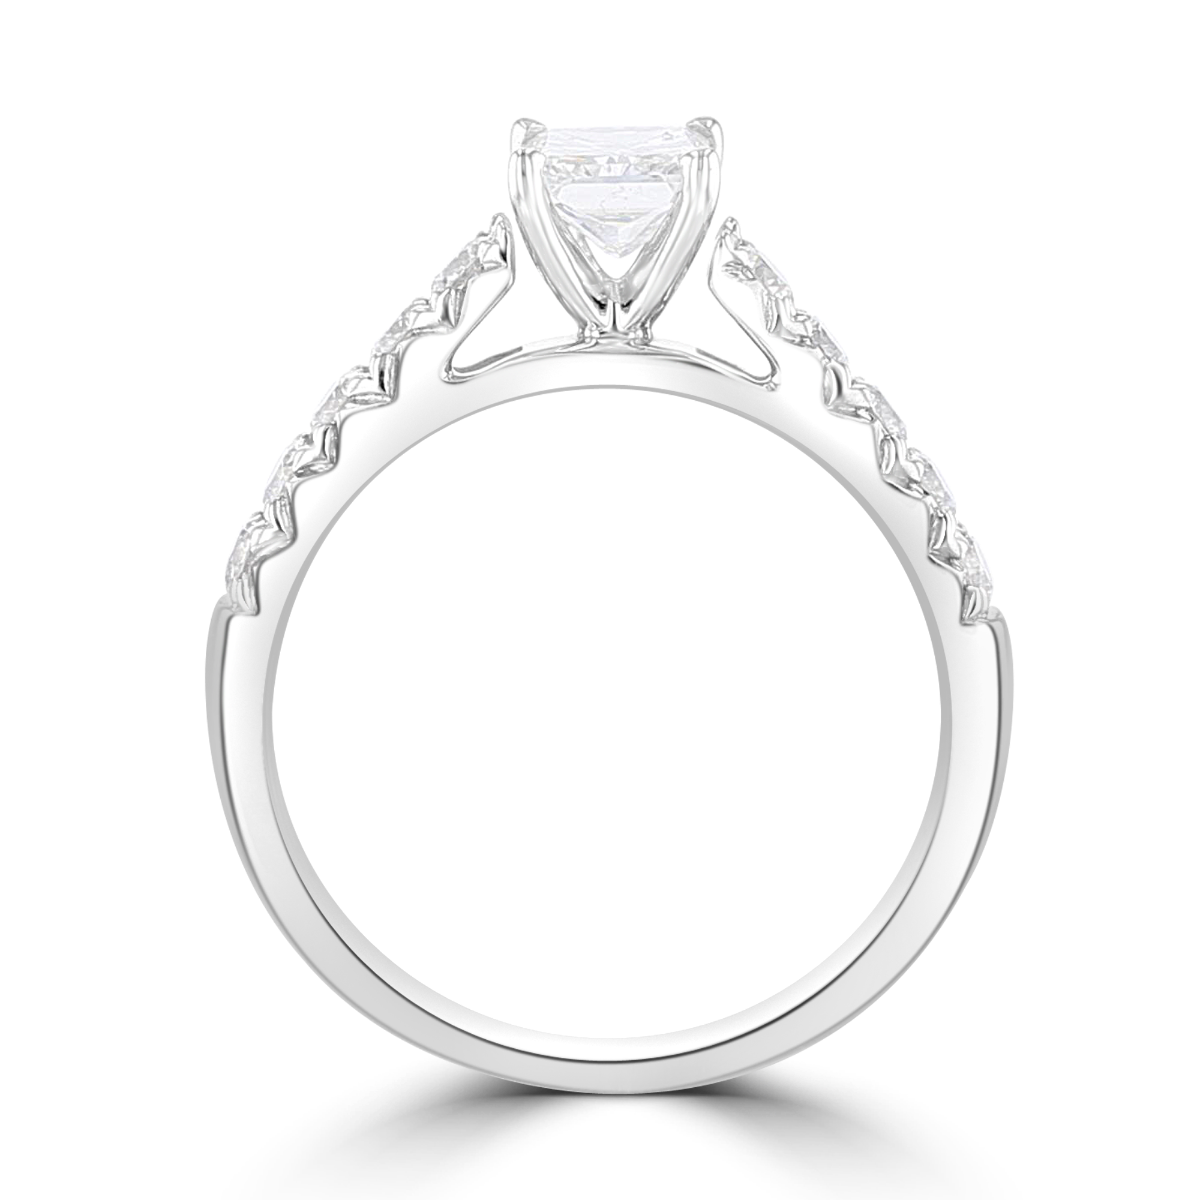 14KT White Gold 1 CTW Radiant Diamond Cathedral Ring 4,4.5,5,5.5,6,6.5,7,7.5,8,8.5,9